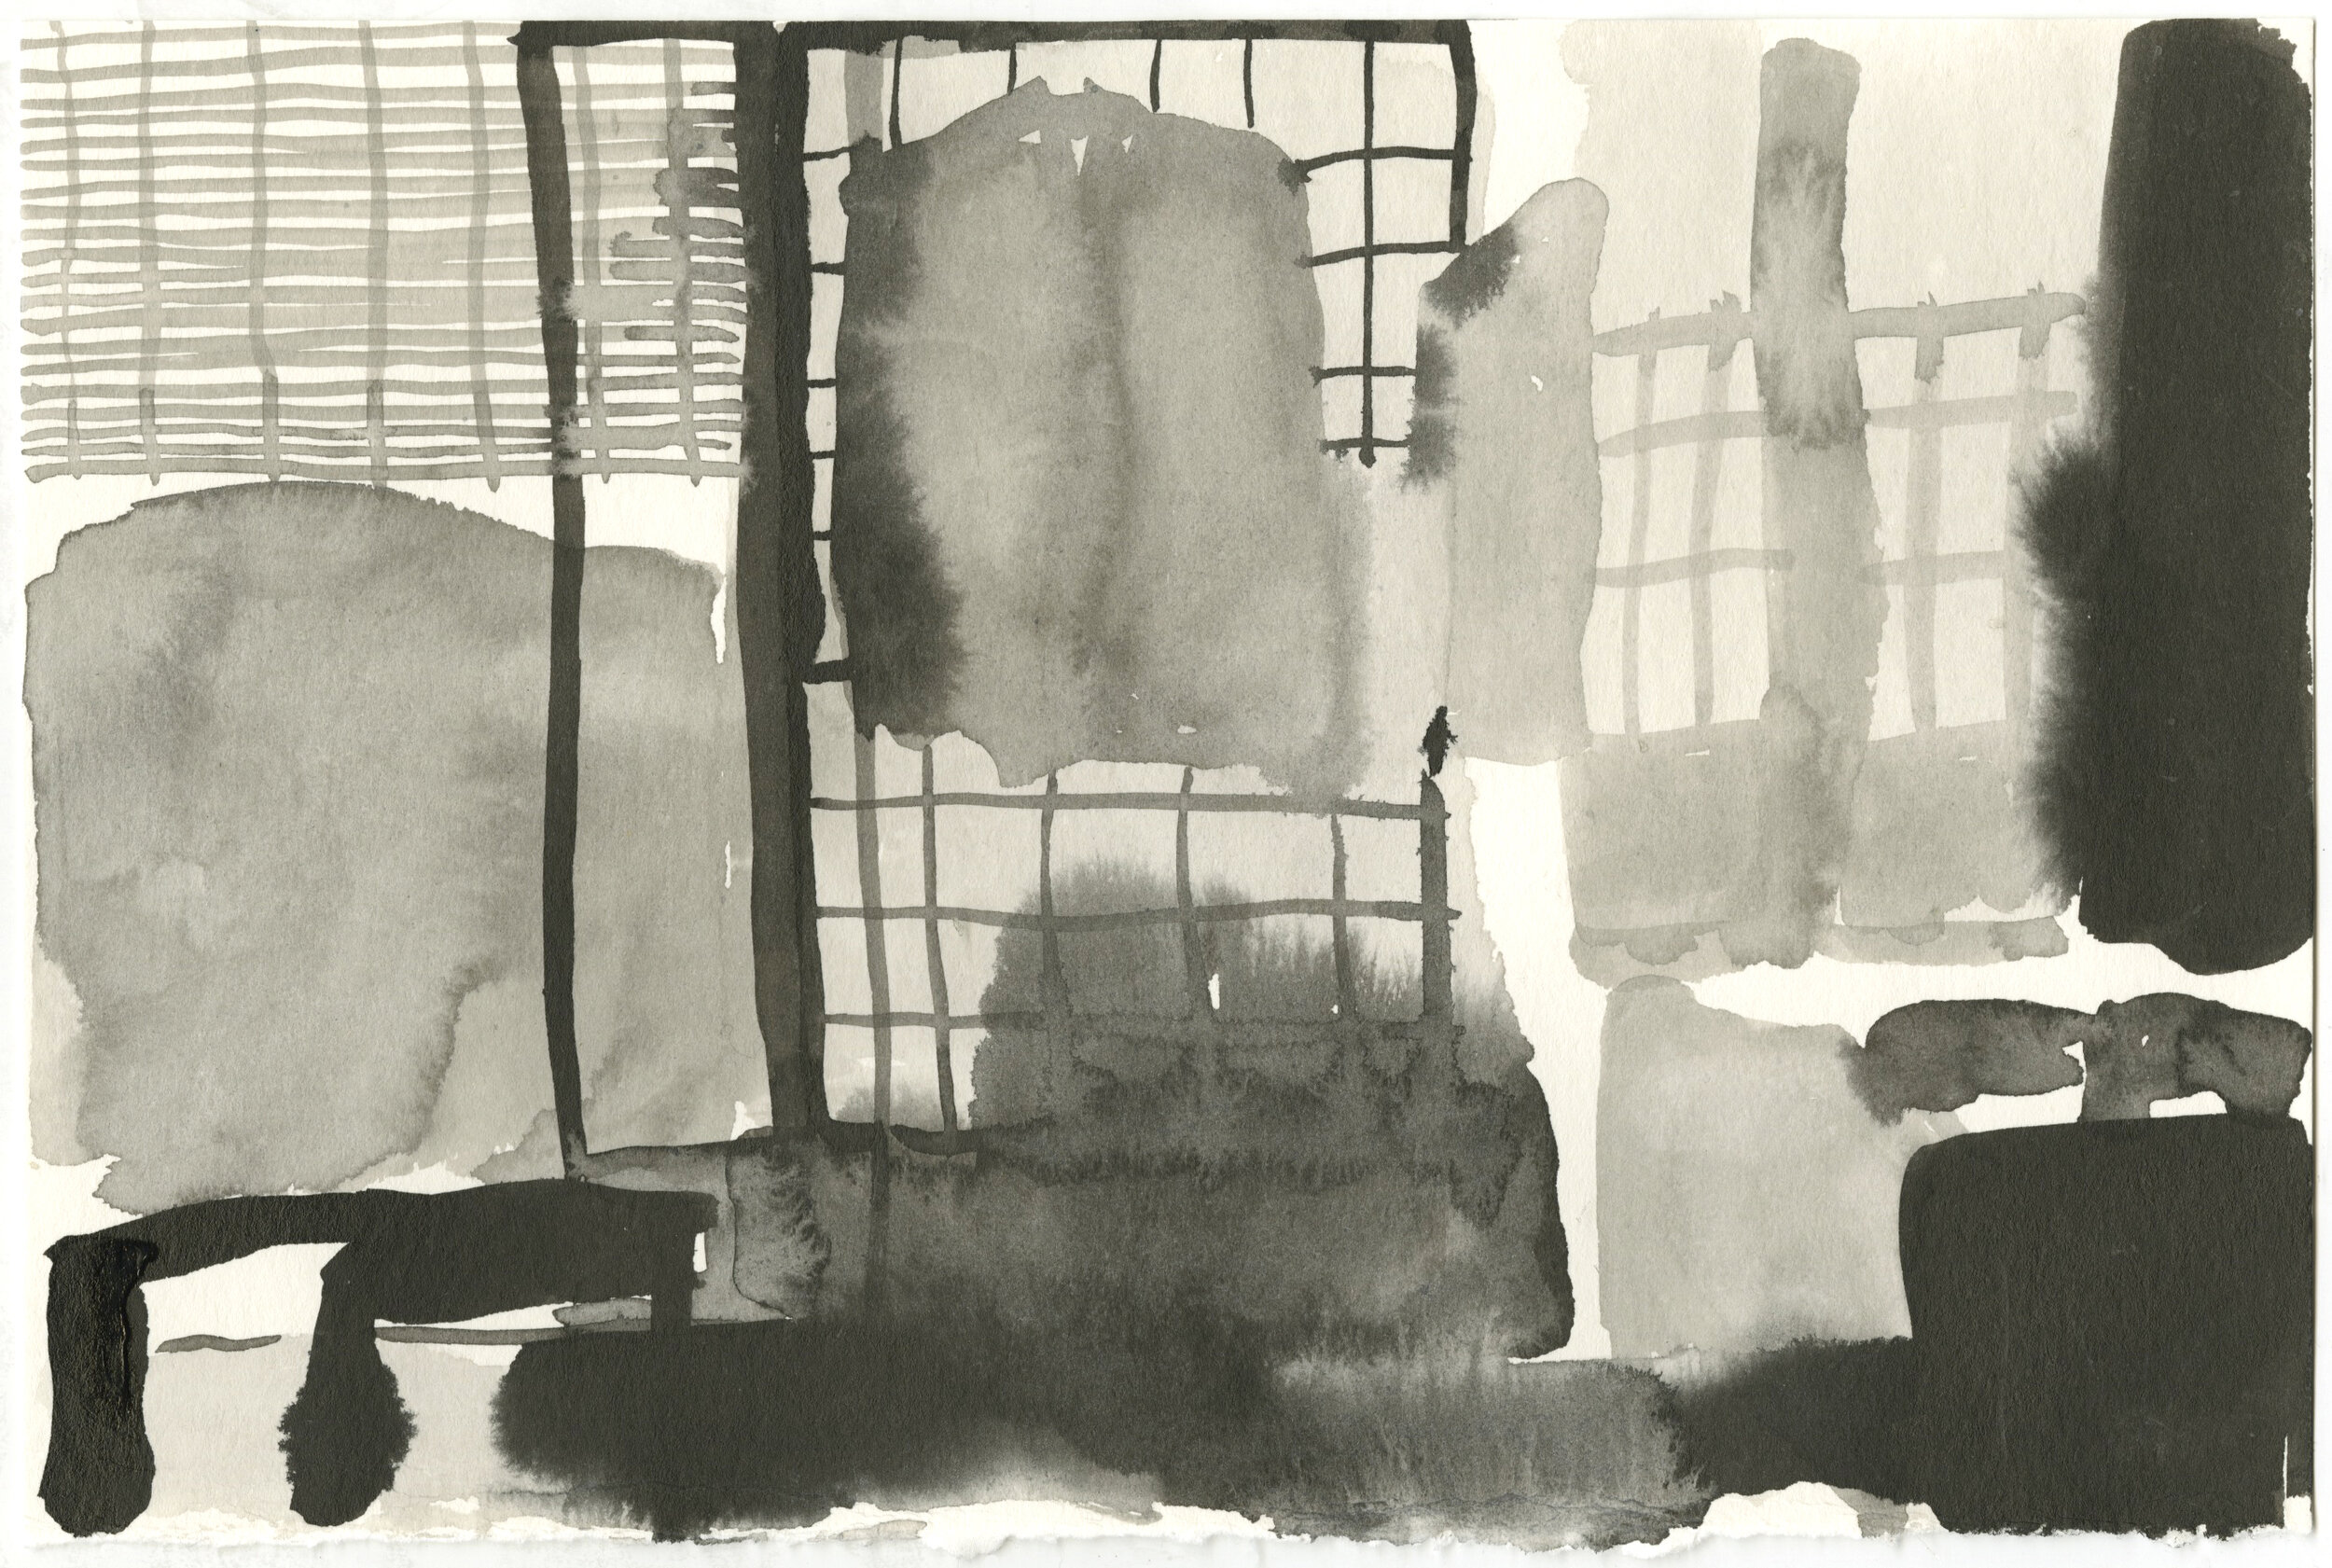  sumi ink on paper, 6”x8.75”, 2019  A series of ongoing work inspired by or directly referencing the work of Yasujirō Ozu. 